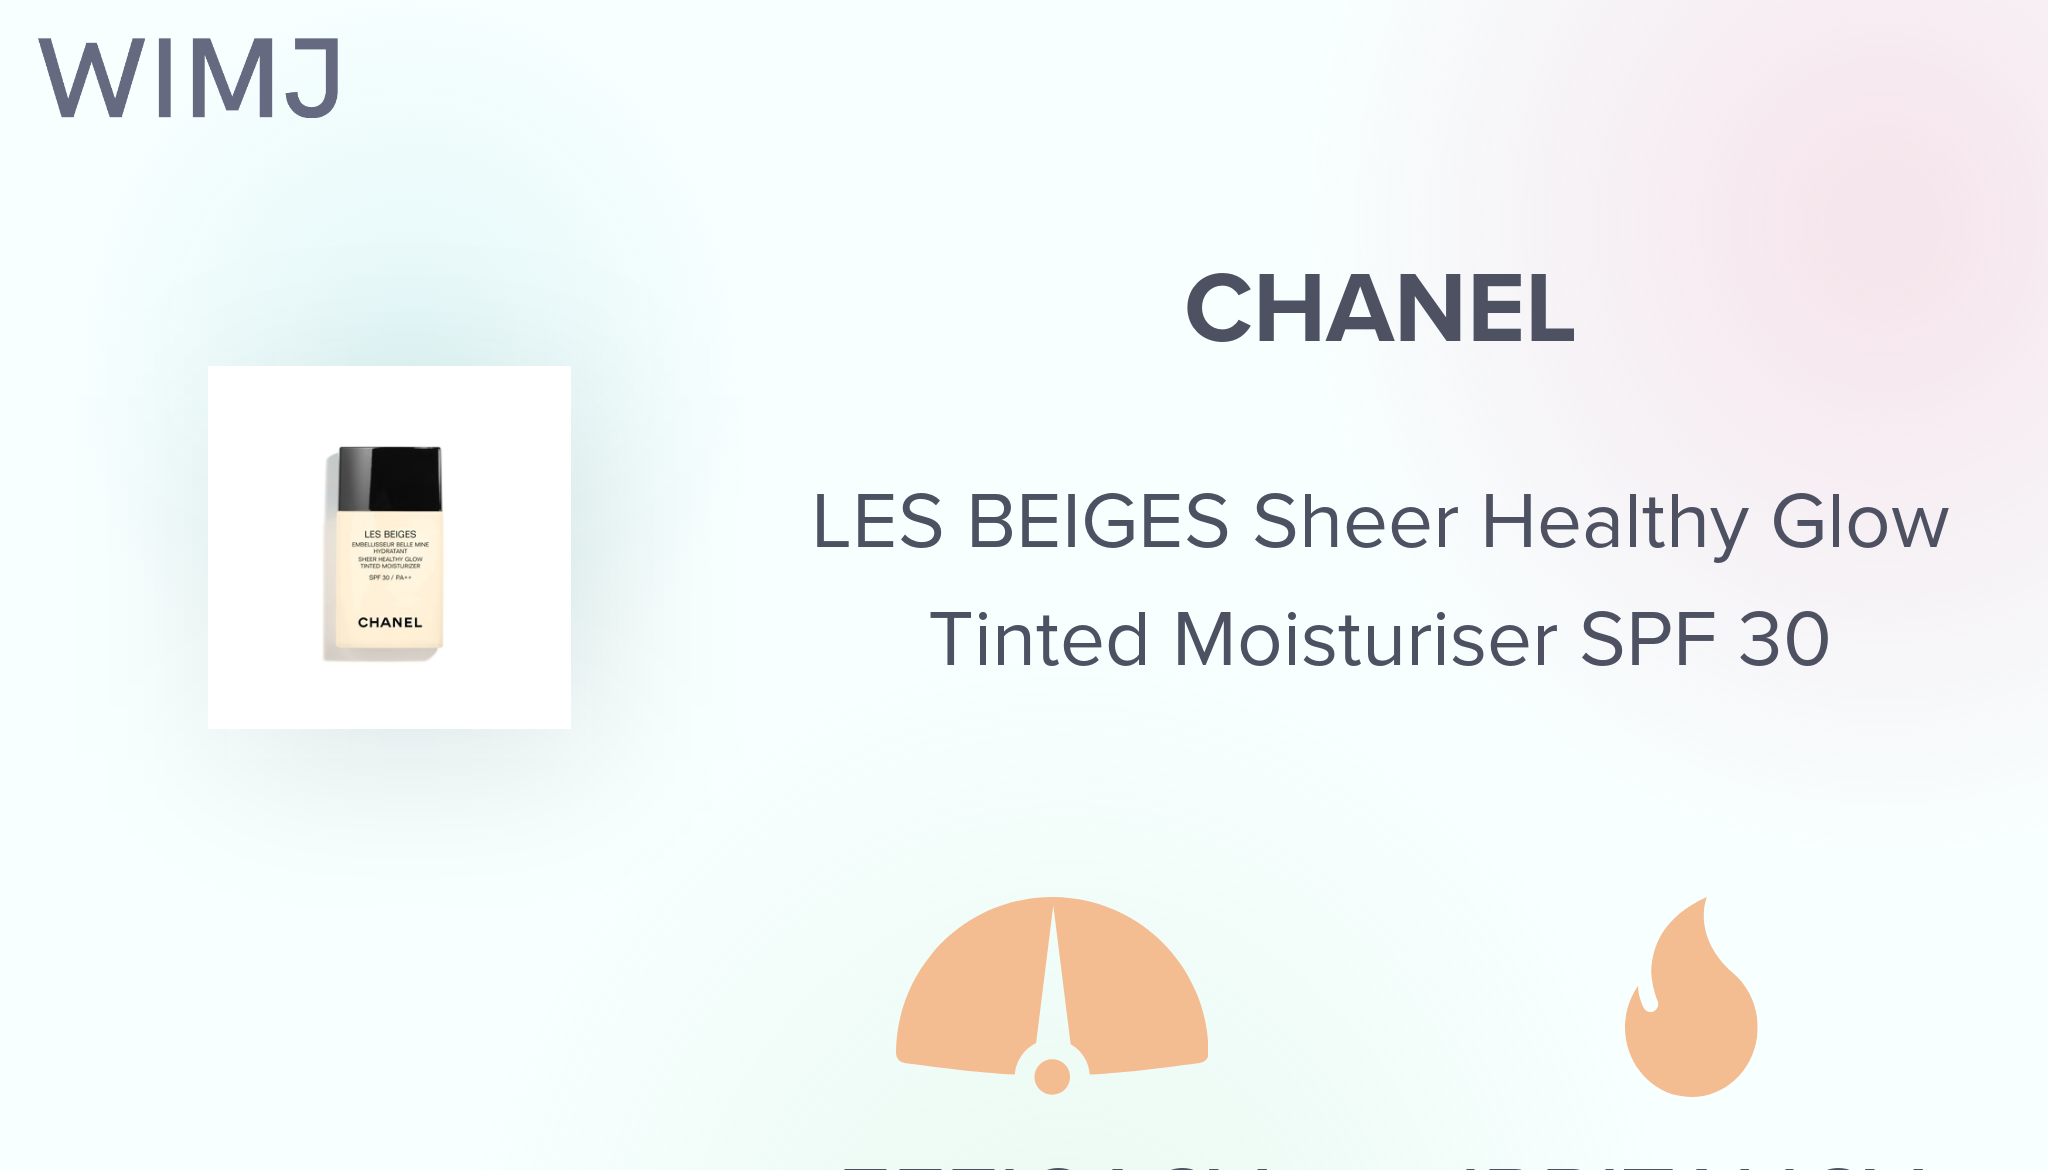 Les Beiges Sheer Healthy Glow Moisturizing Tint SPF 30 - Light by